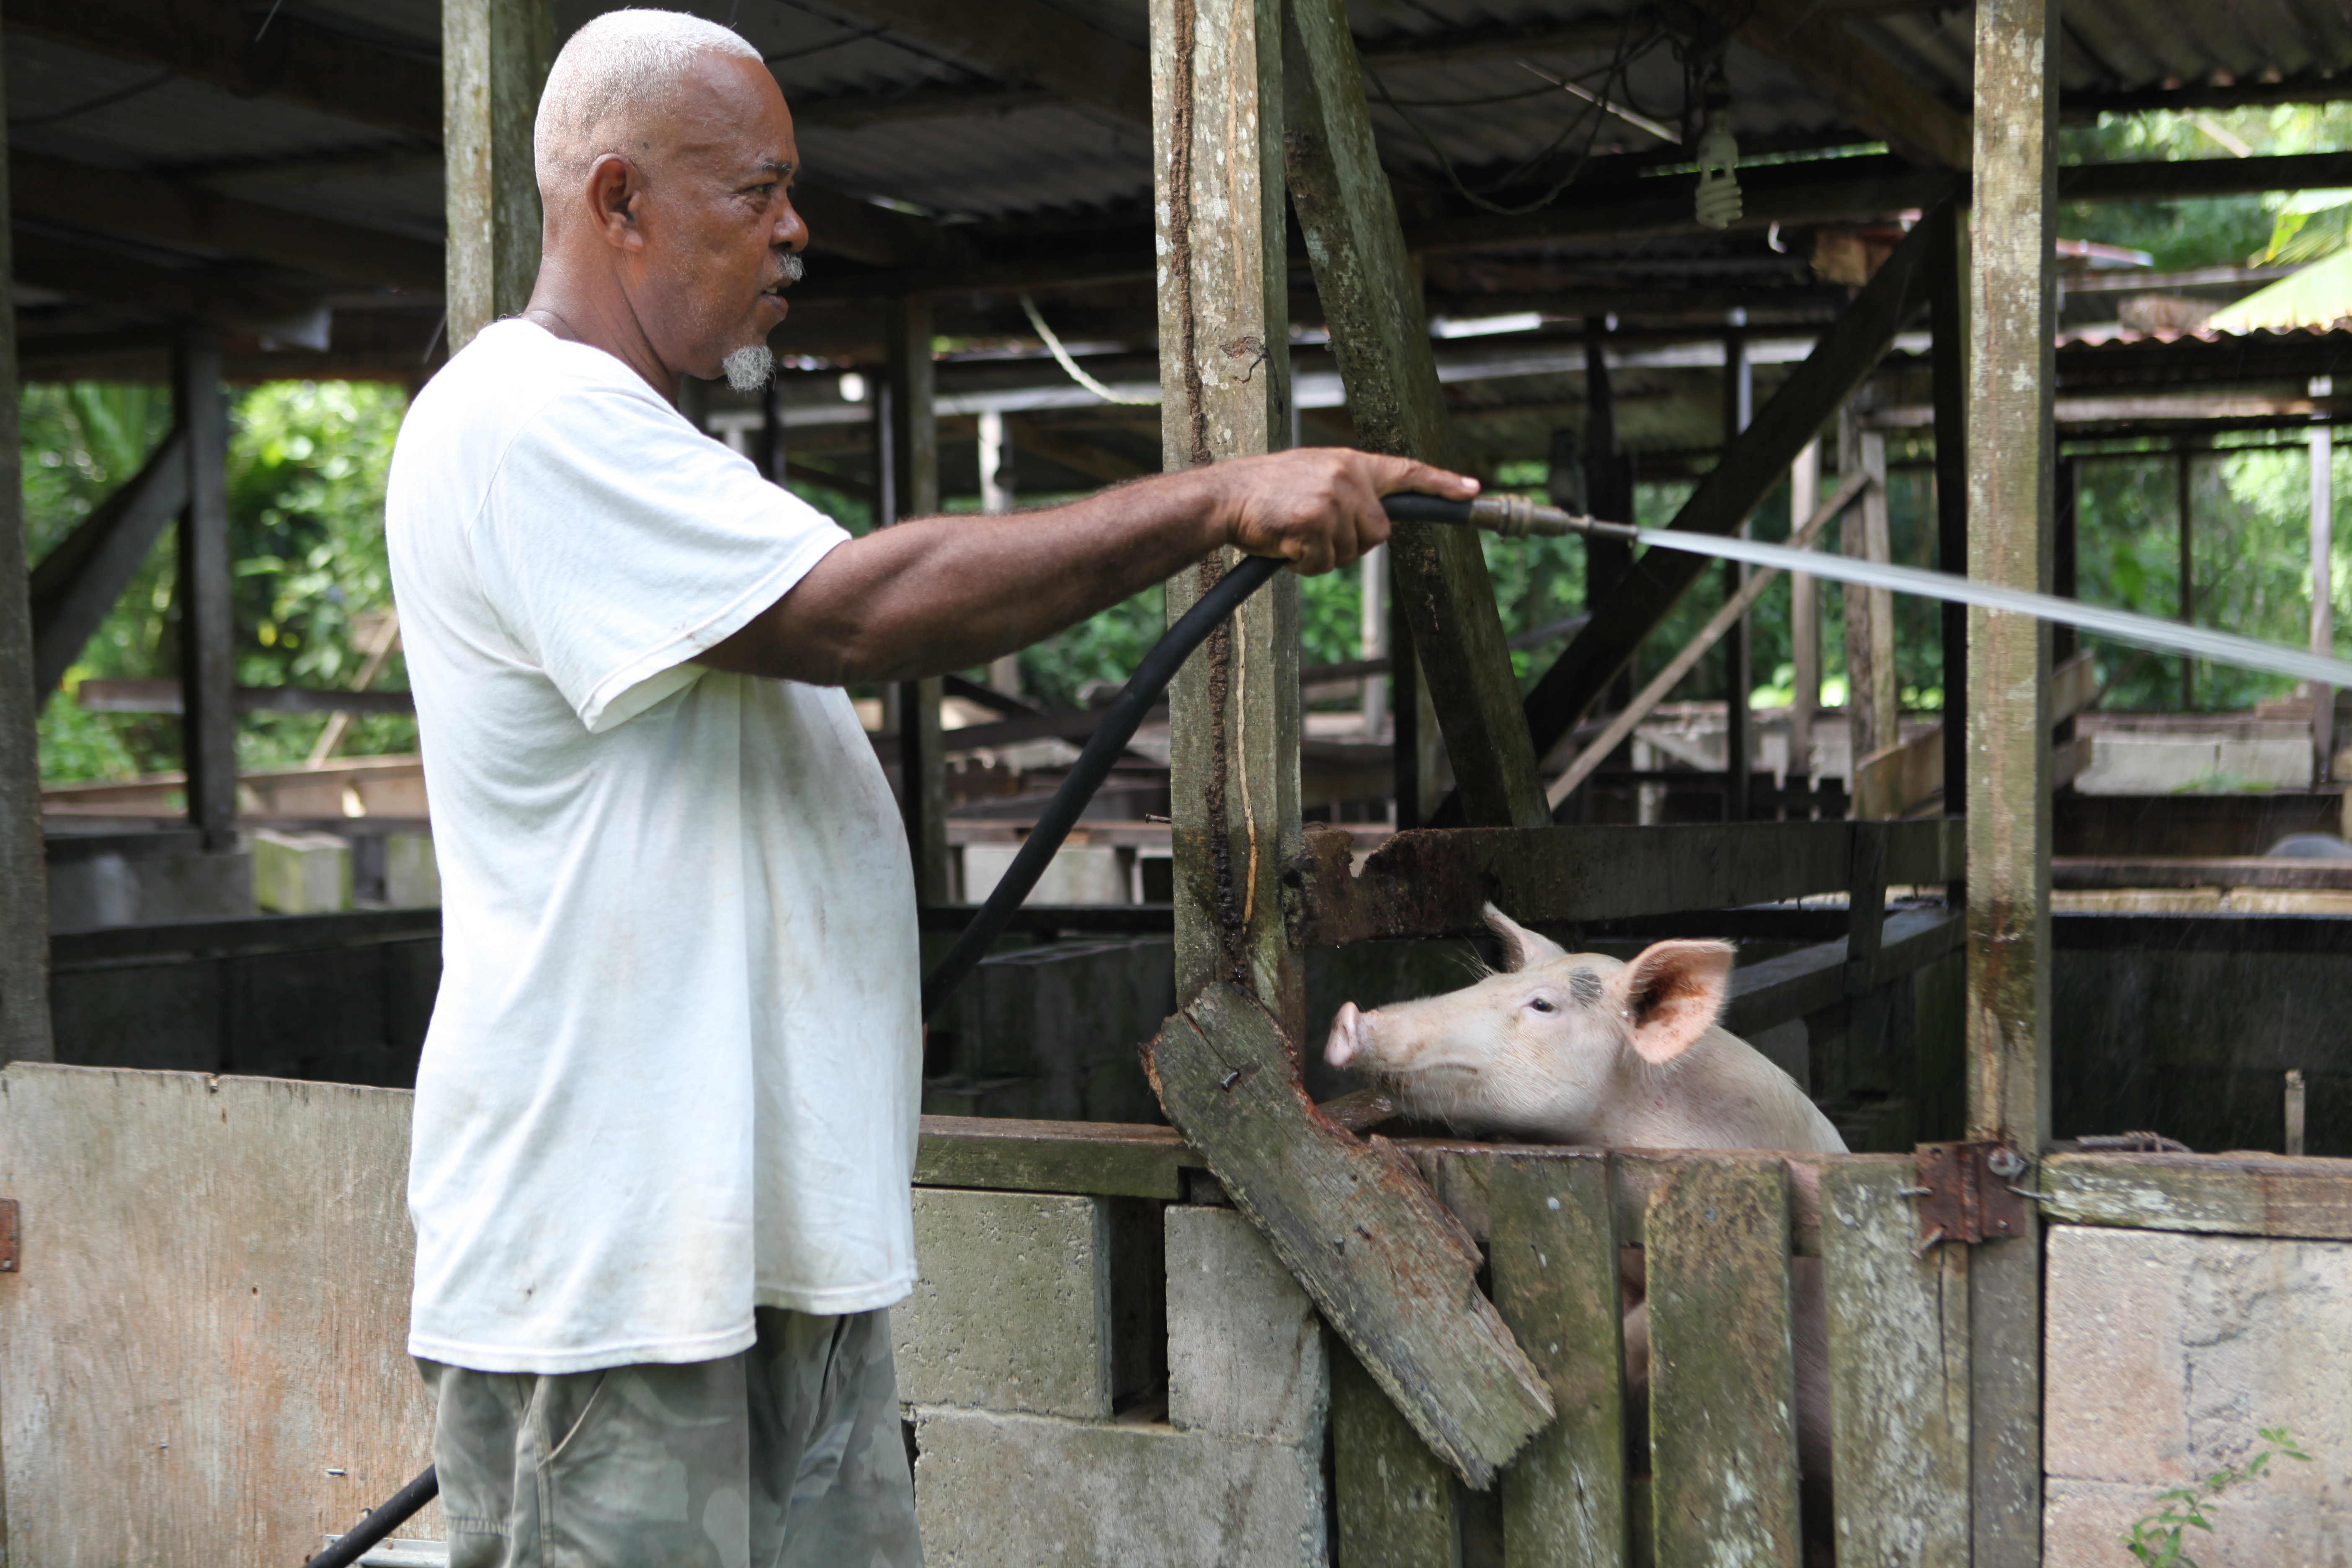 Belize River Valley resident, Tony Anthony, demonstrating how water has helped him at his farm